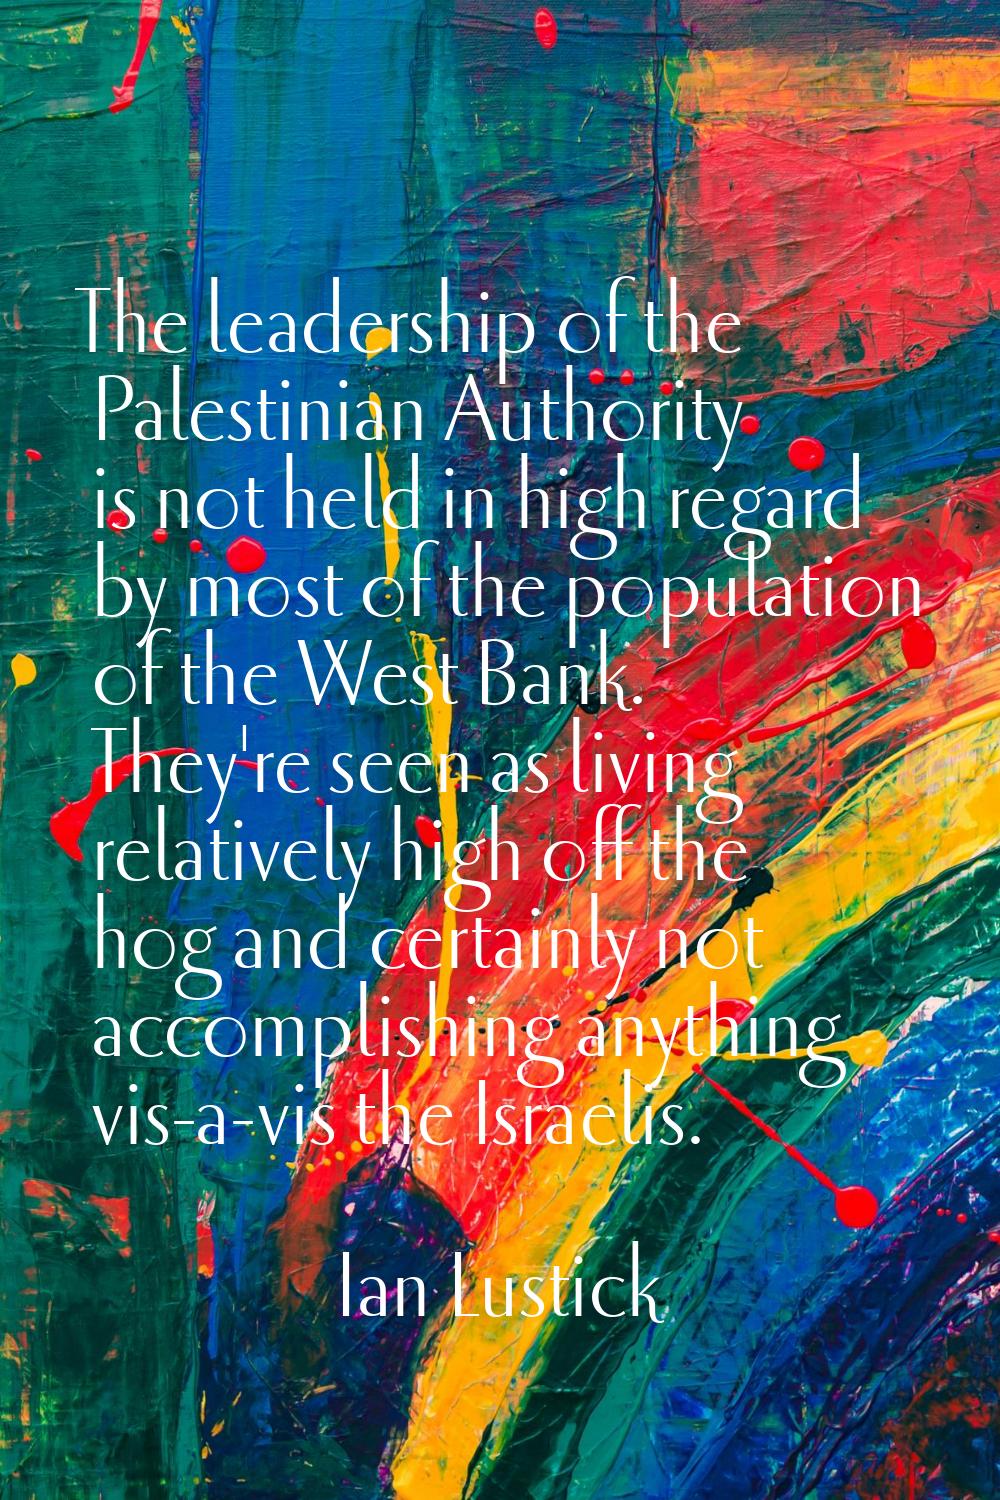 The leadership of the Palestinian Authority is not held in high regard by most of the population of